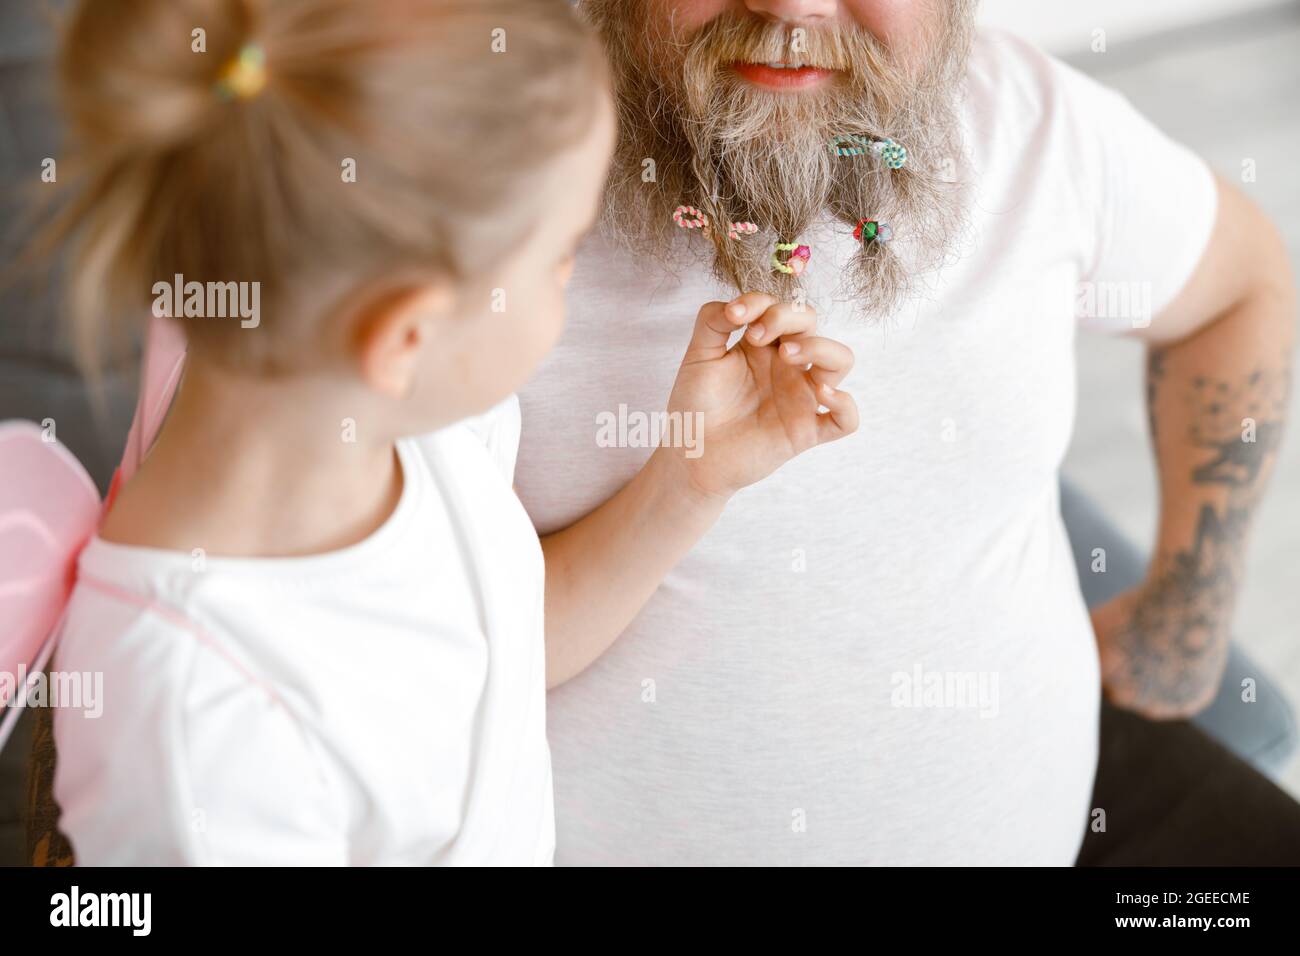 Curious little girl touches daddy beard with colorful scrunchies playing together at home Stock Photo